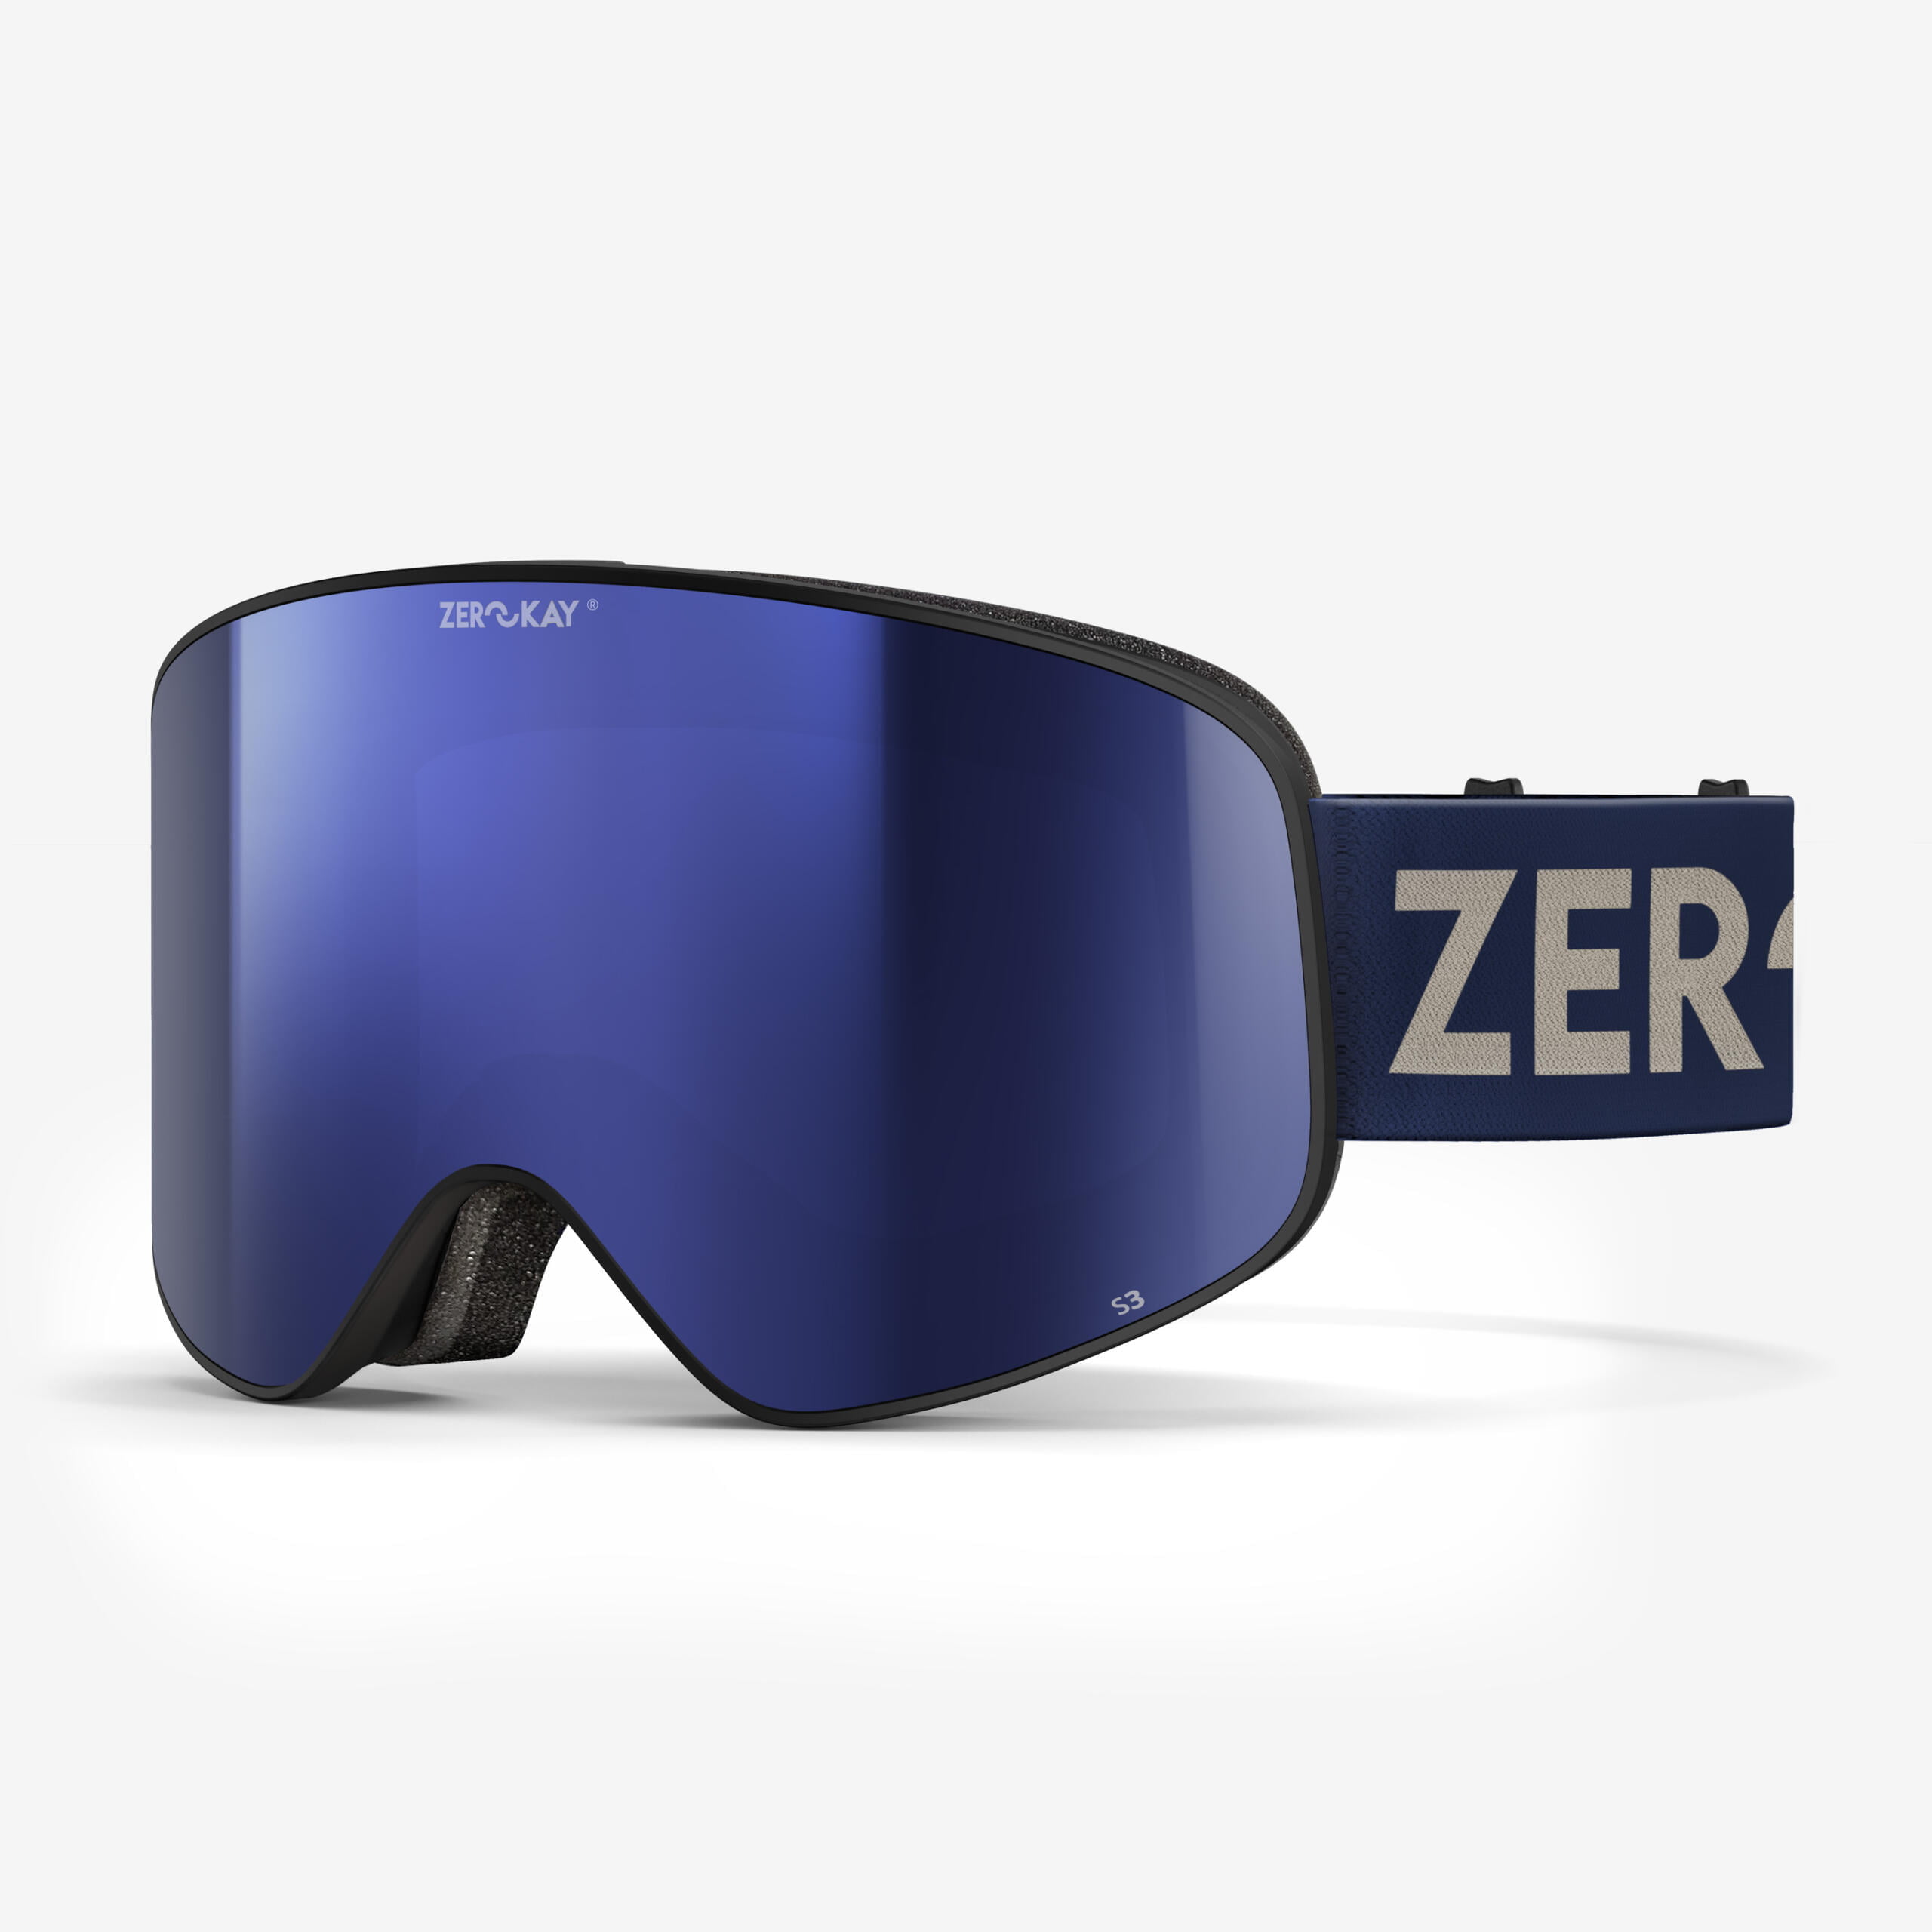 Contrast Ski Goggles featuring a blue lens and blue strap, Italian craftsmanship, certified for skiing, with cutting-edge anti-fog technology for clear visibility.